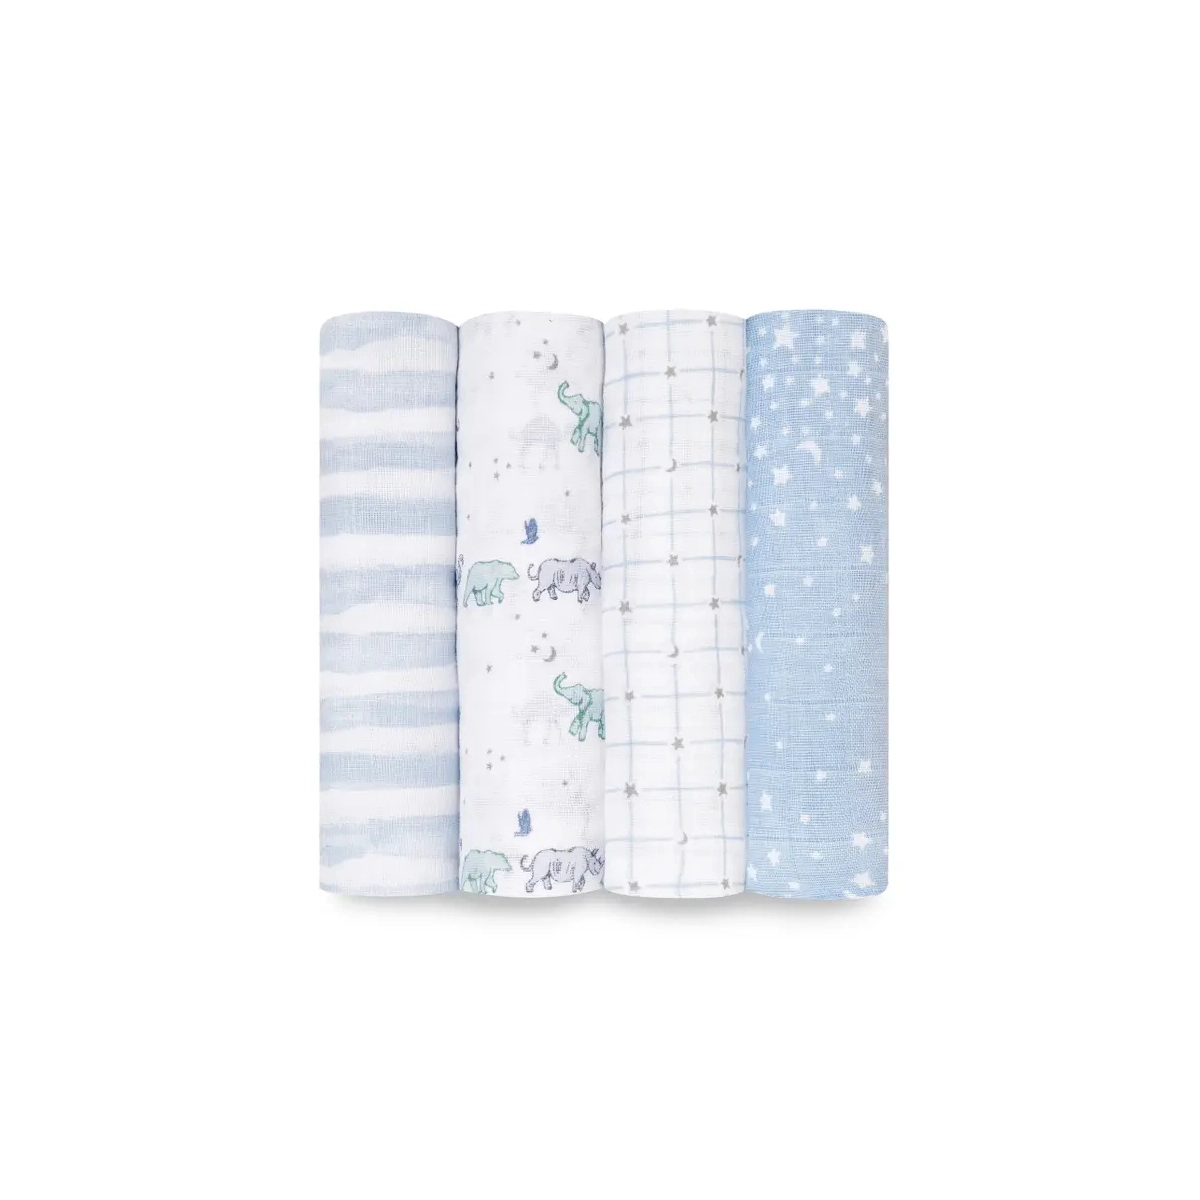 Image of Aden + Anais Pack of 4 Large Swaddle Cotton Muslin - Rising Star (23-19-039)